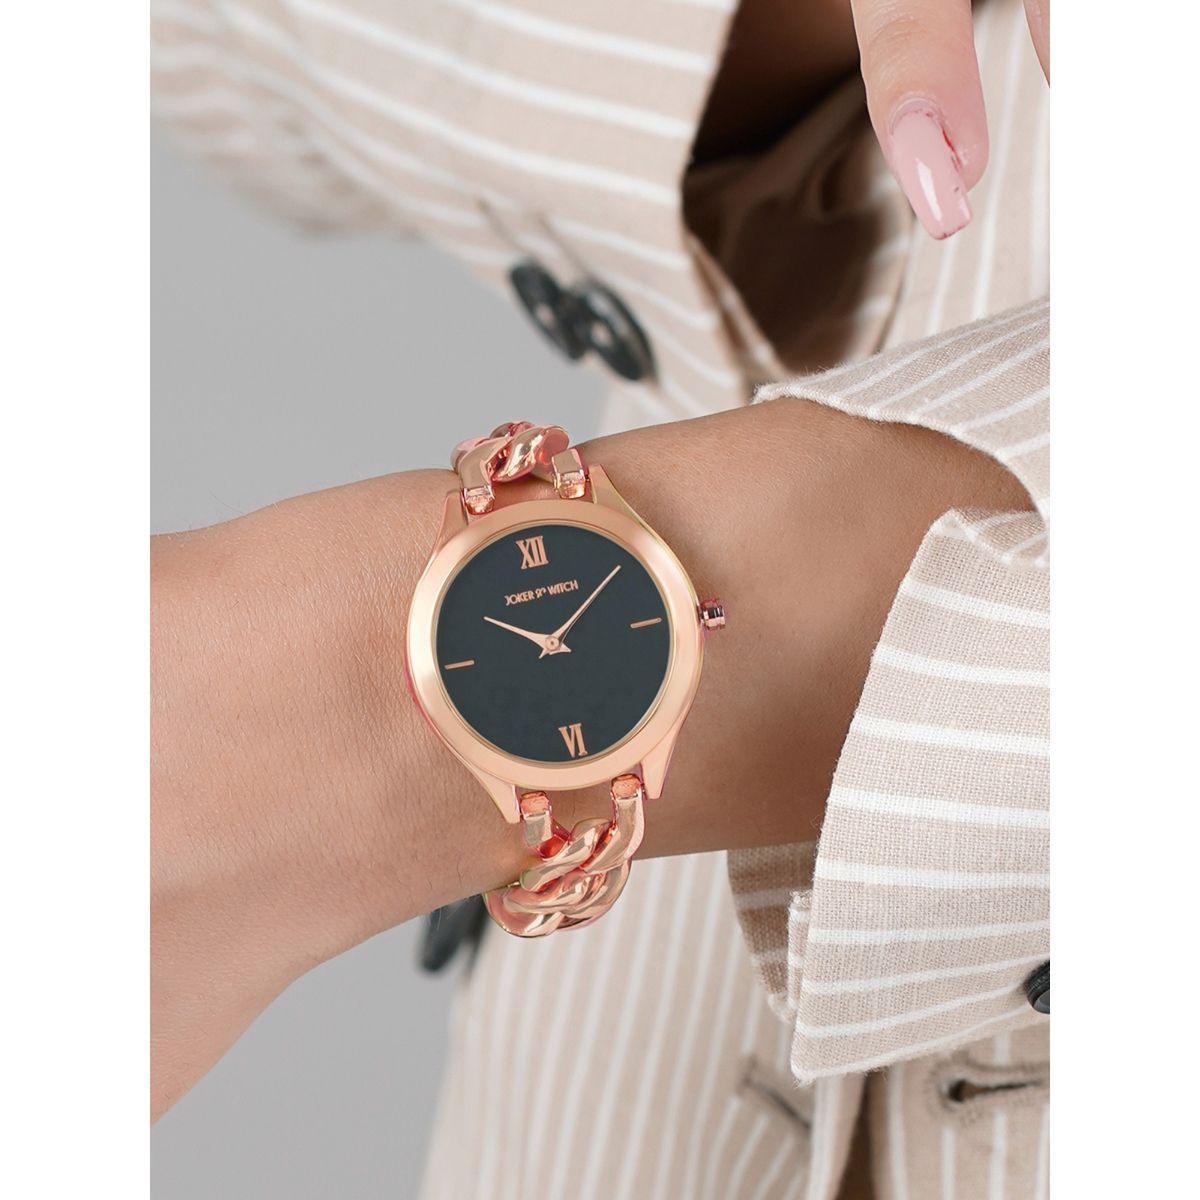 Daniel Klein Brown Color Stainless Steel Strap Watch for Women  DK.1.13163-5: Buy Daniel Klein Brown Color Stainless Steel Strap Watch for  Women DK.1.13163-5 Online at Best Price in India | Nykaa